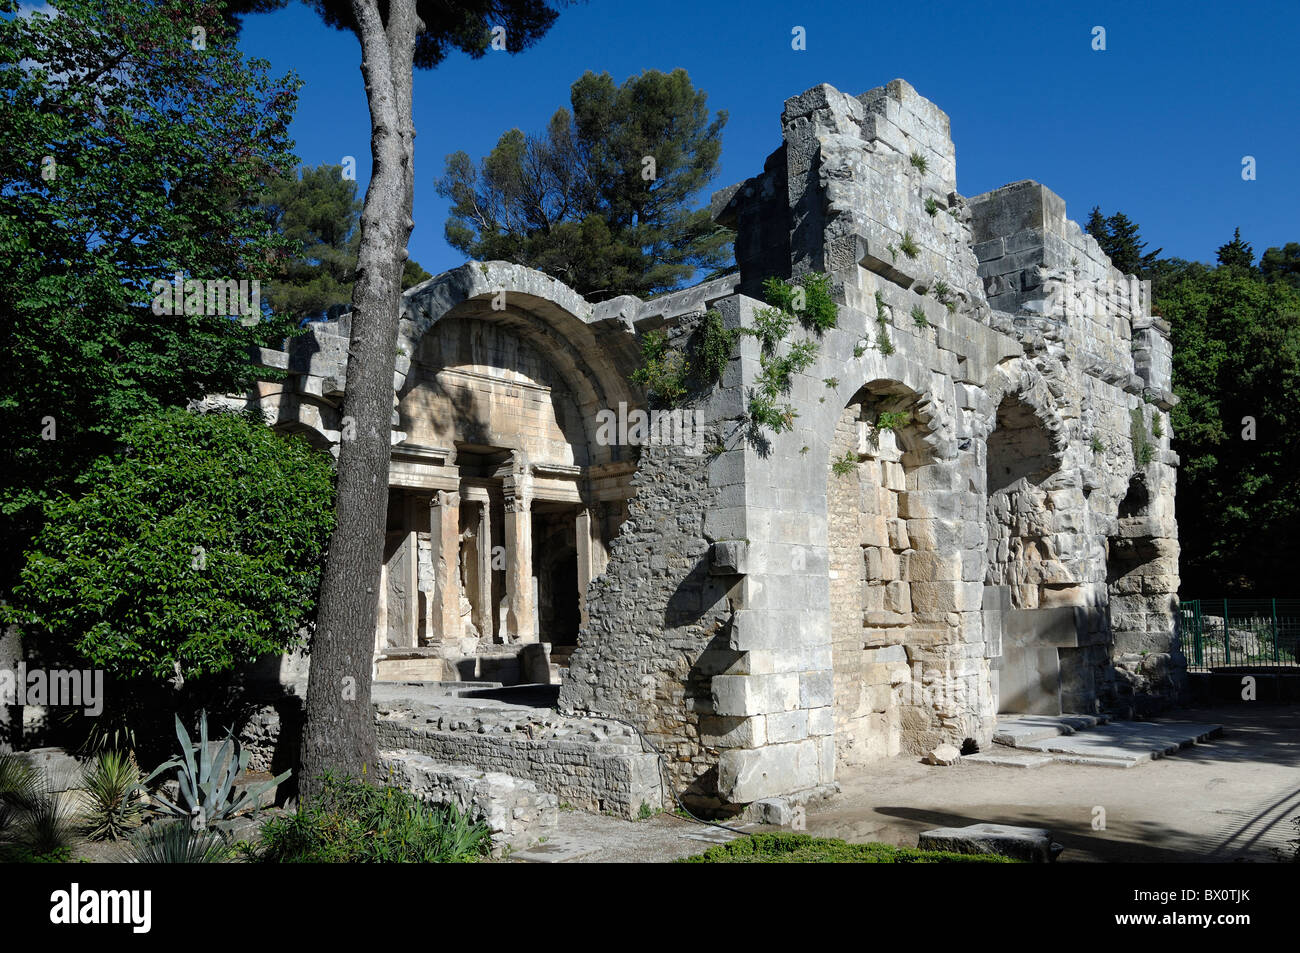 Roman Remains or Ruins of the Temple of Diana, Jardins de la Fontaine, Nimes, Gard, Languedoc-Roussillon, France Stock Photo